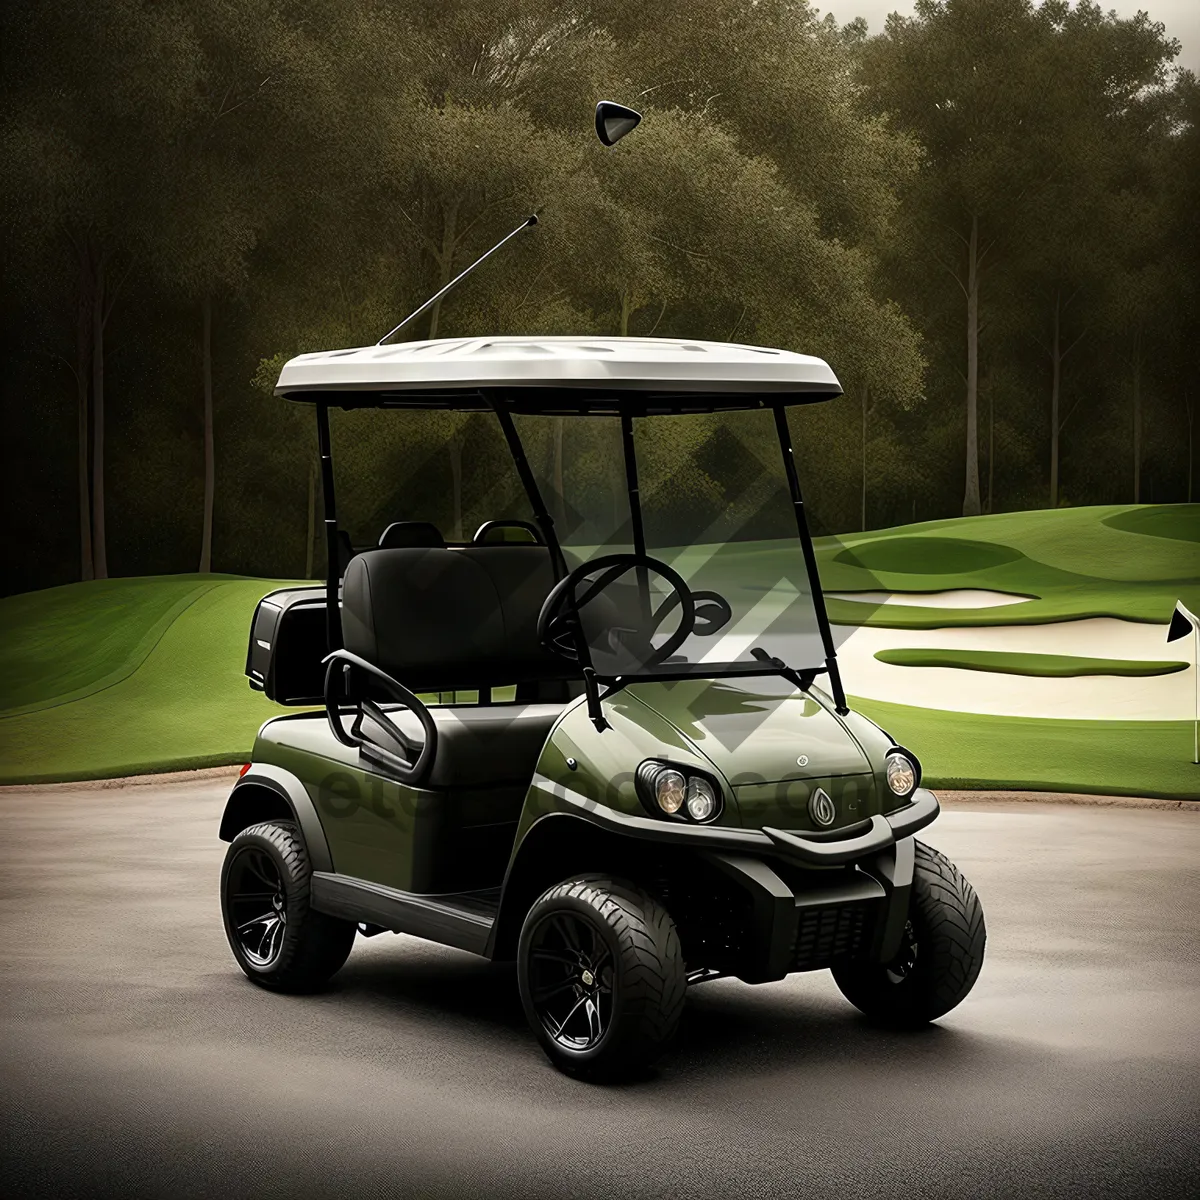 Picture of Outdoor Golf Cart on Green Course